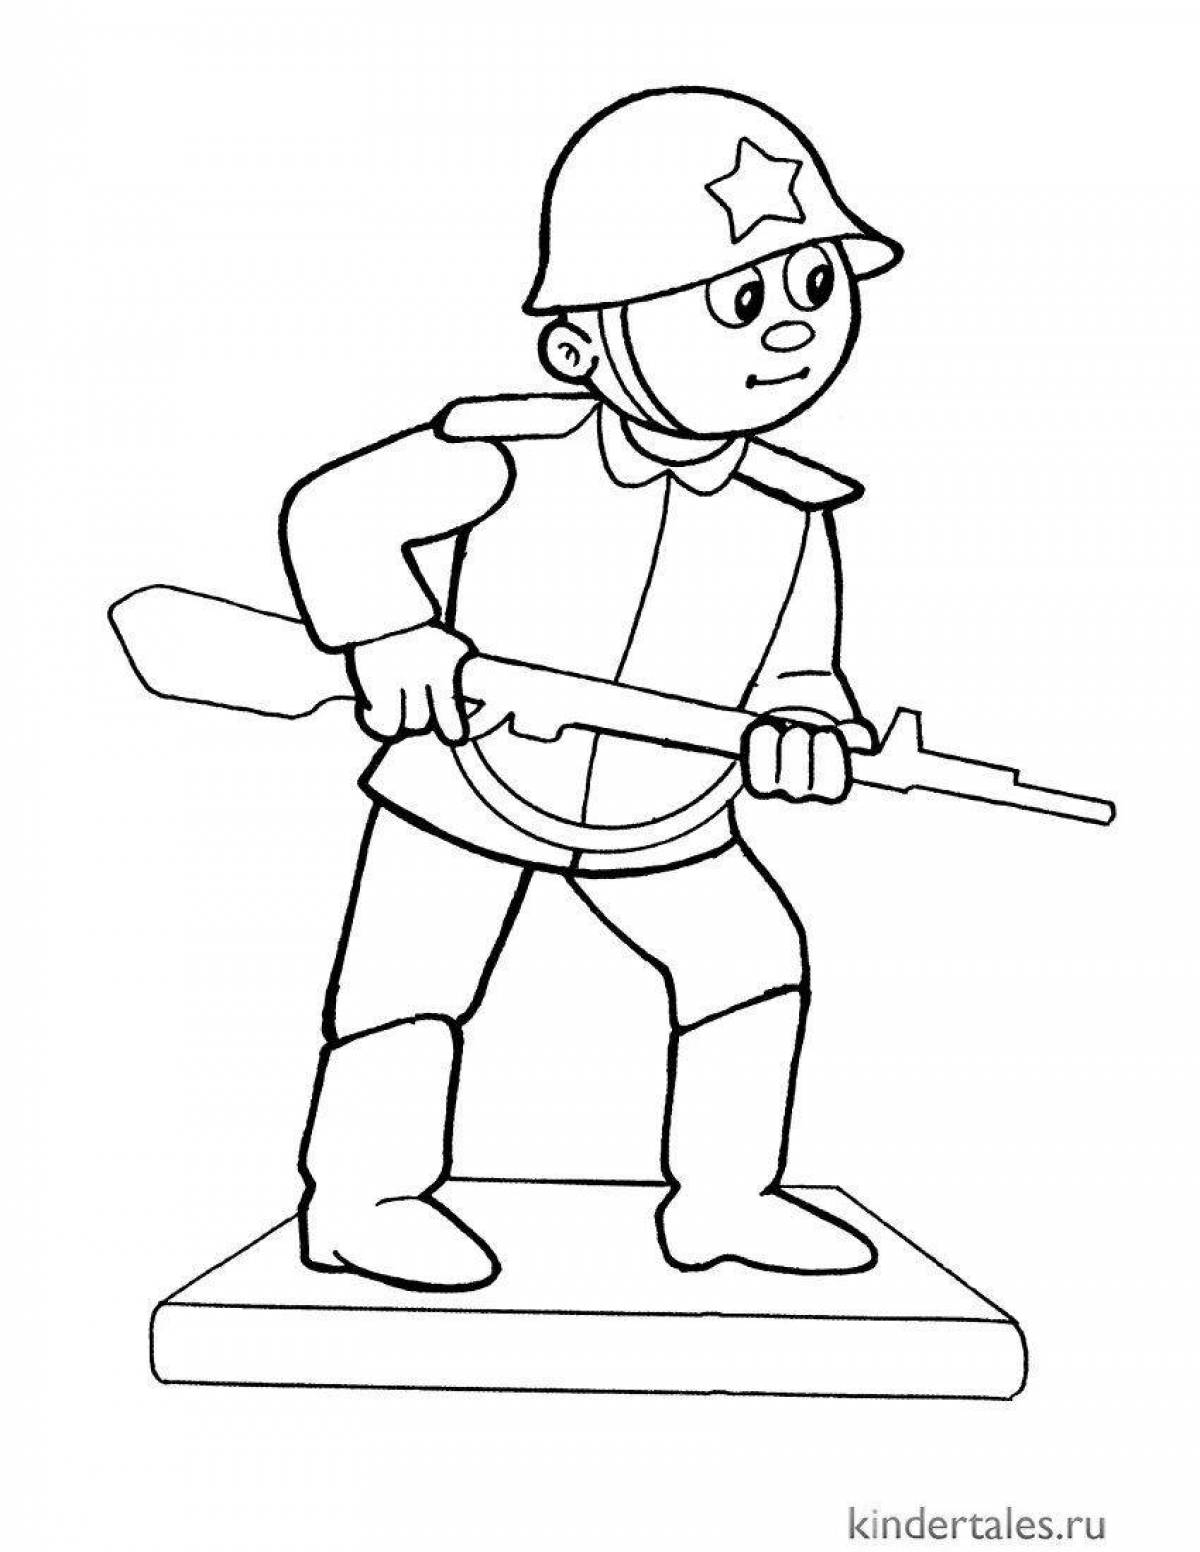 Mature soldier on duty drawing